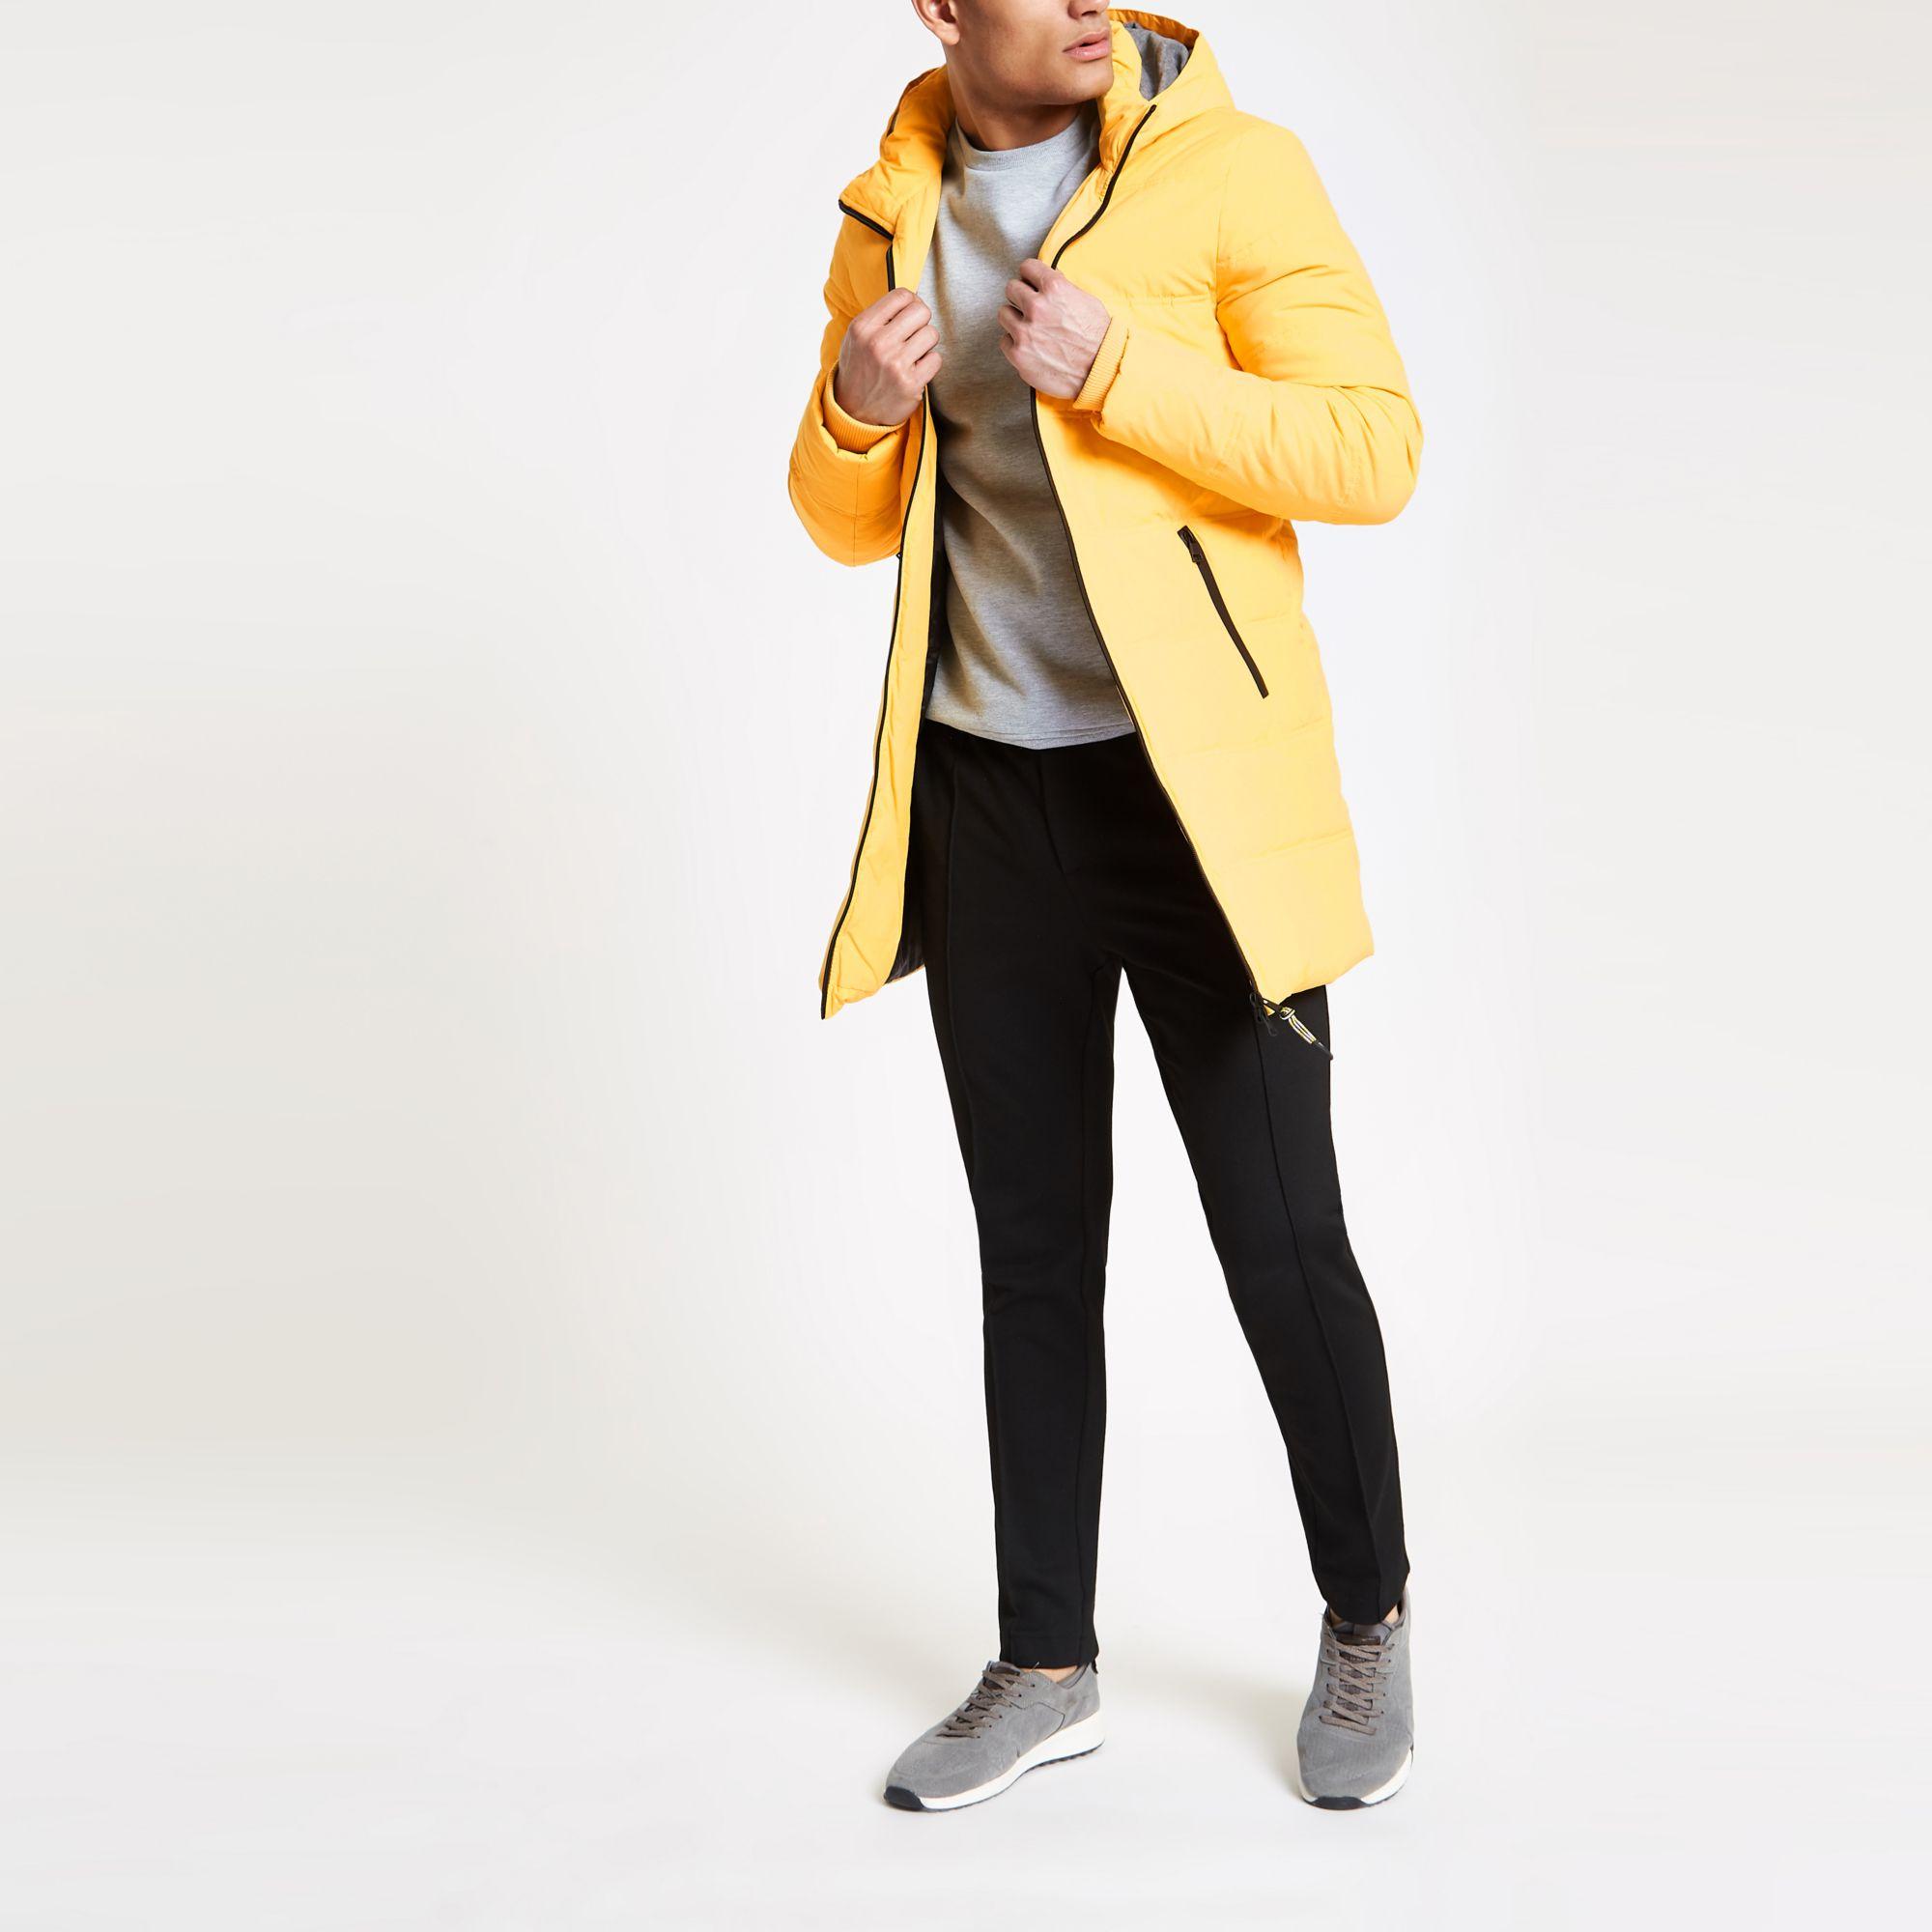 River Island Only & Sons Yellow Longline Puffer Jacket for Men - Lyst